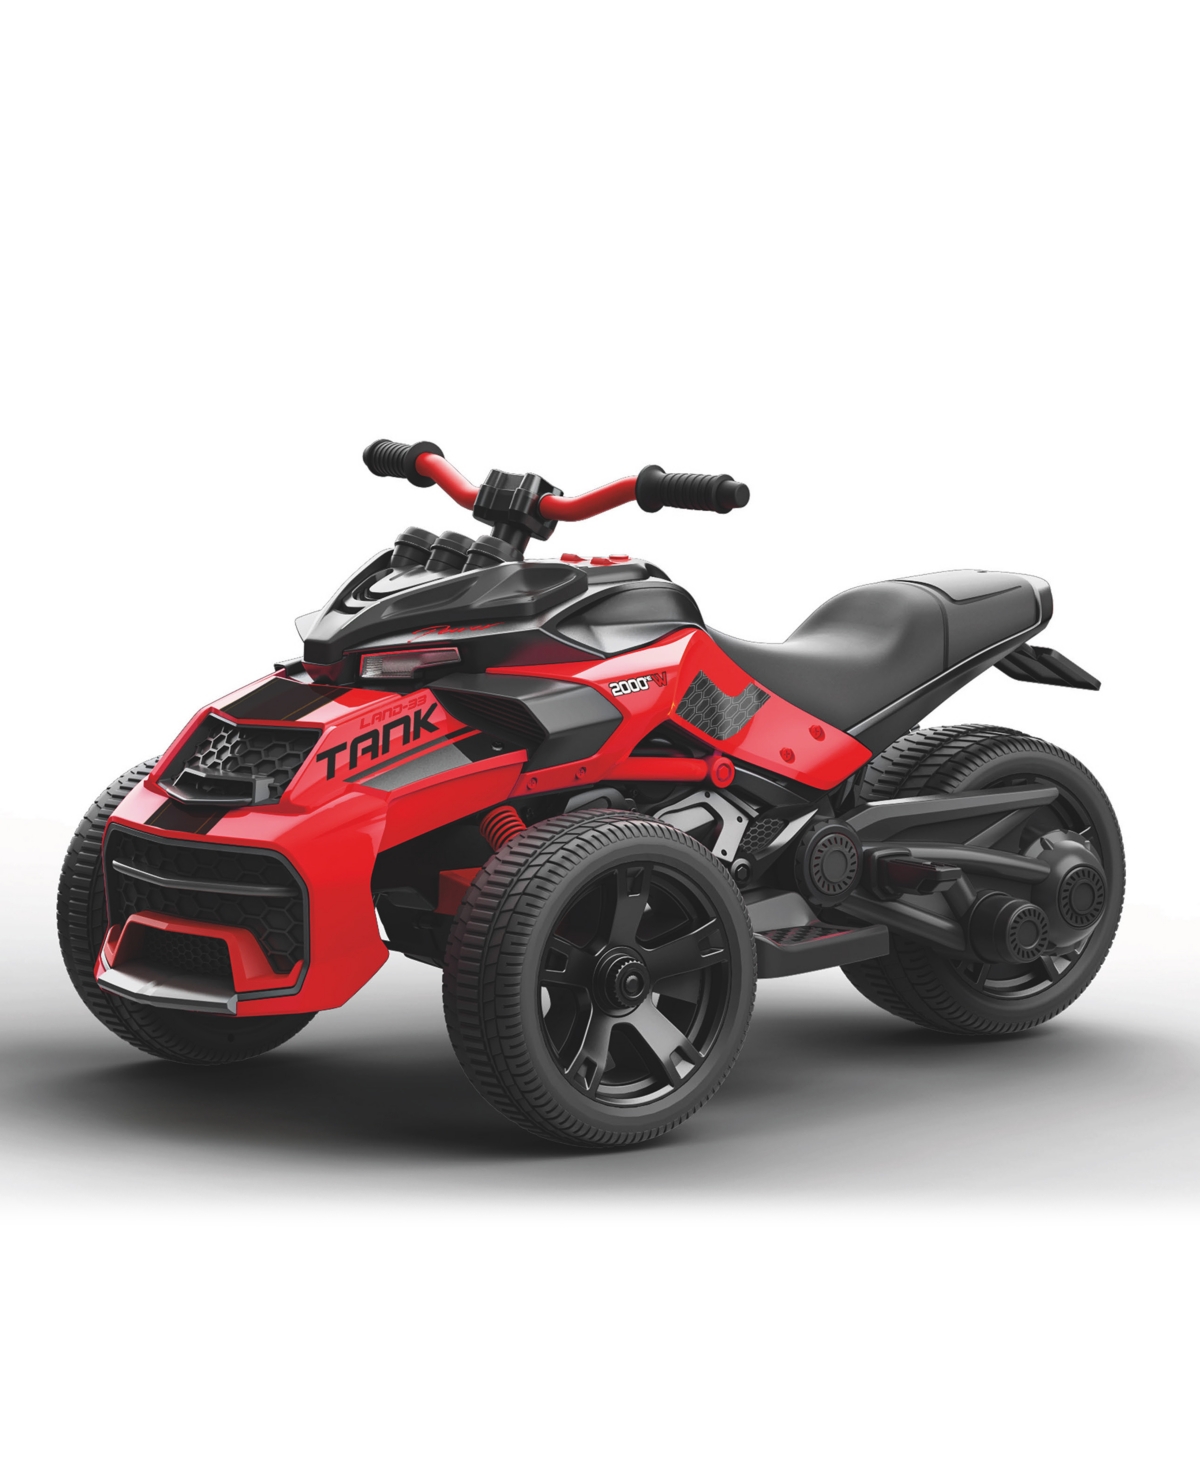 Freddo Kids' Spider 2-seater 3 Wheel Motorcycle Ride On In Red